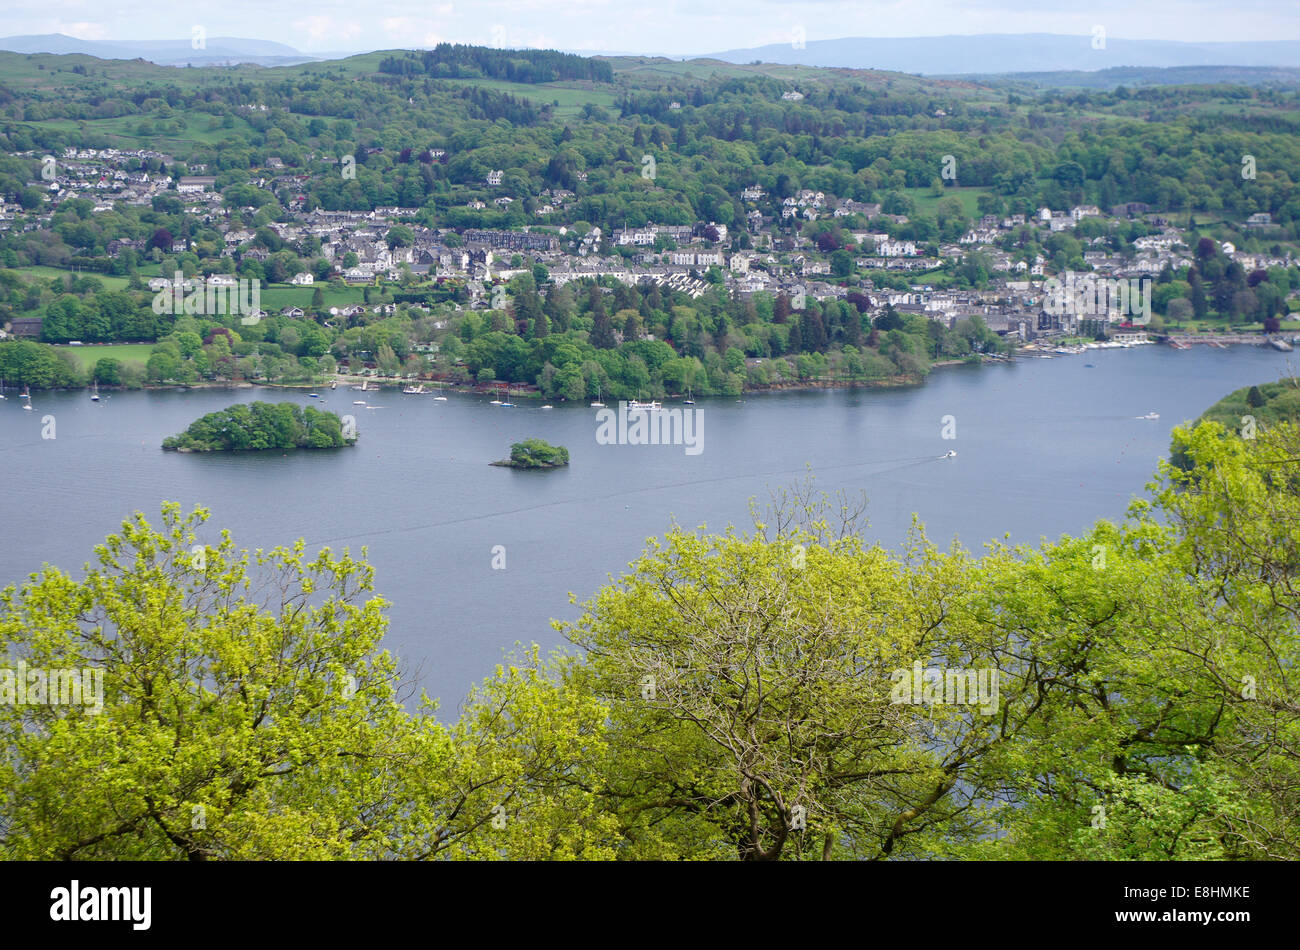 Bowness-On-Windermere Town & Lake Windermere, Lake District National Park, Cumbria, England, UK Stock Photo